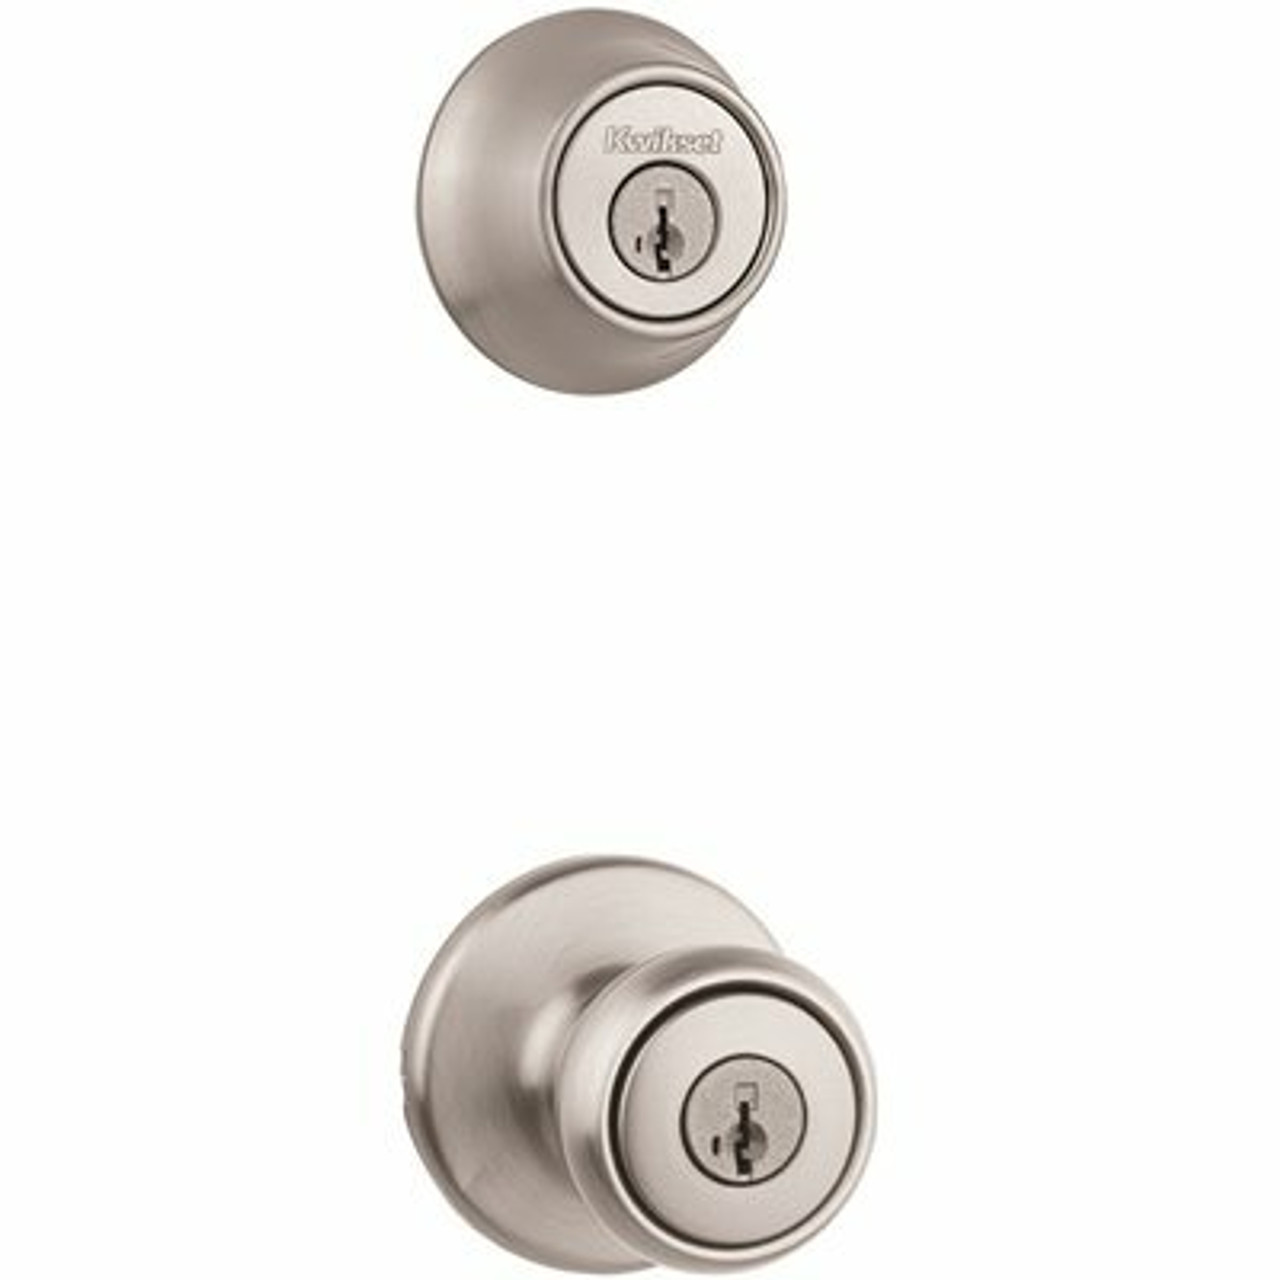 Kwikset Tylo Satin Nickel Door Knob Combo Pack Featuring Smartkey Security With Microban Antimicrobial Technology